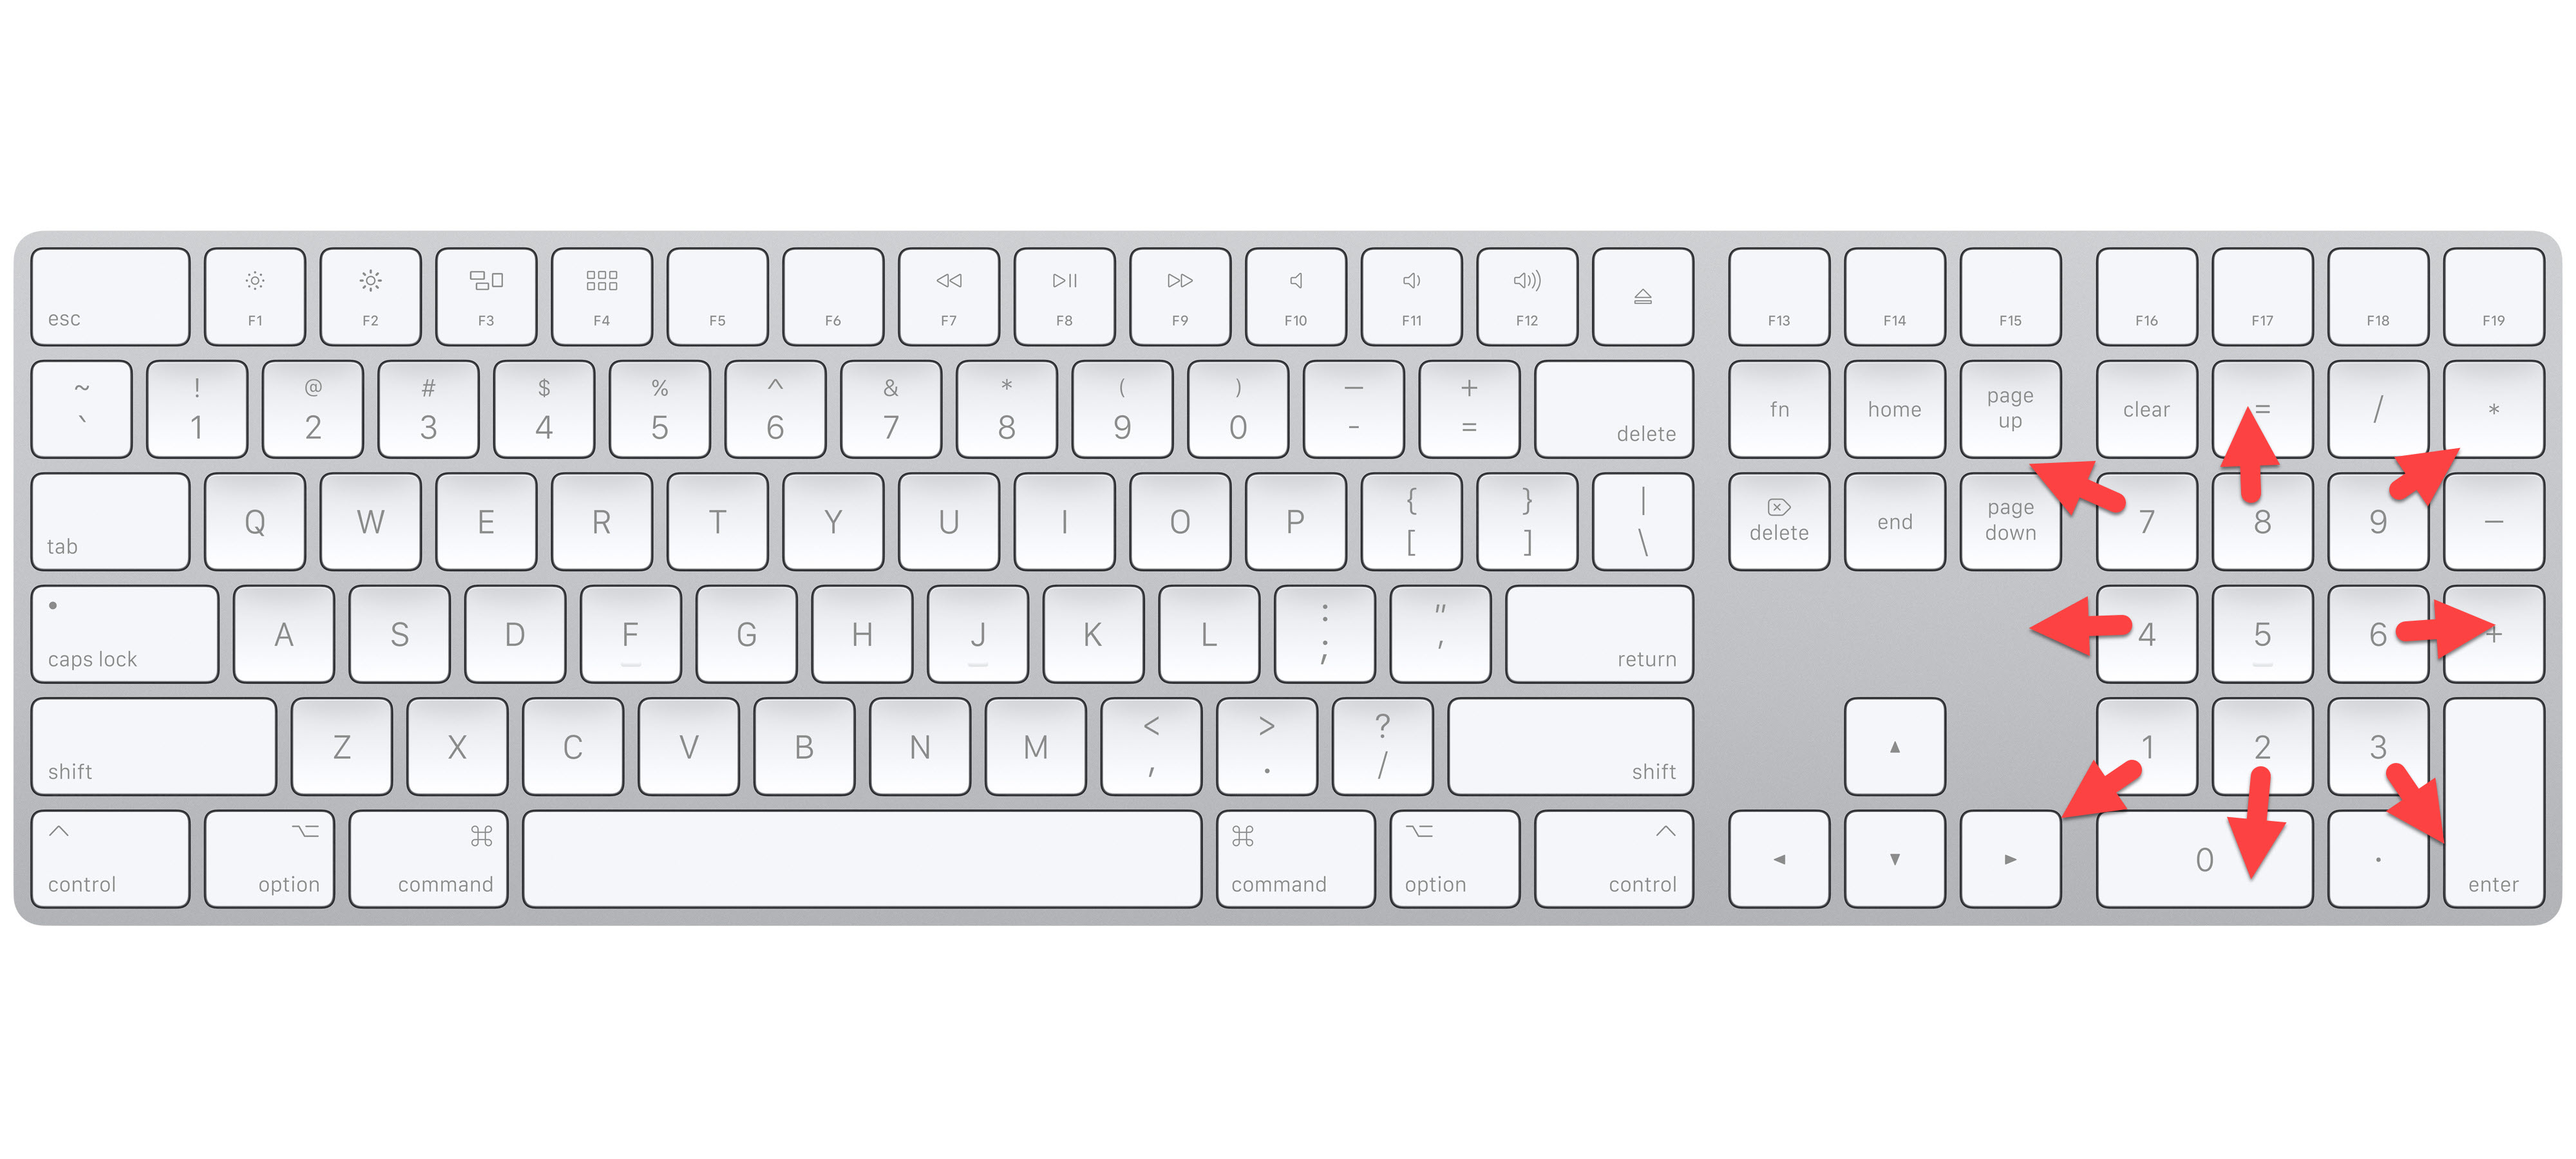 control mouse with keyboard with number pad on Mac